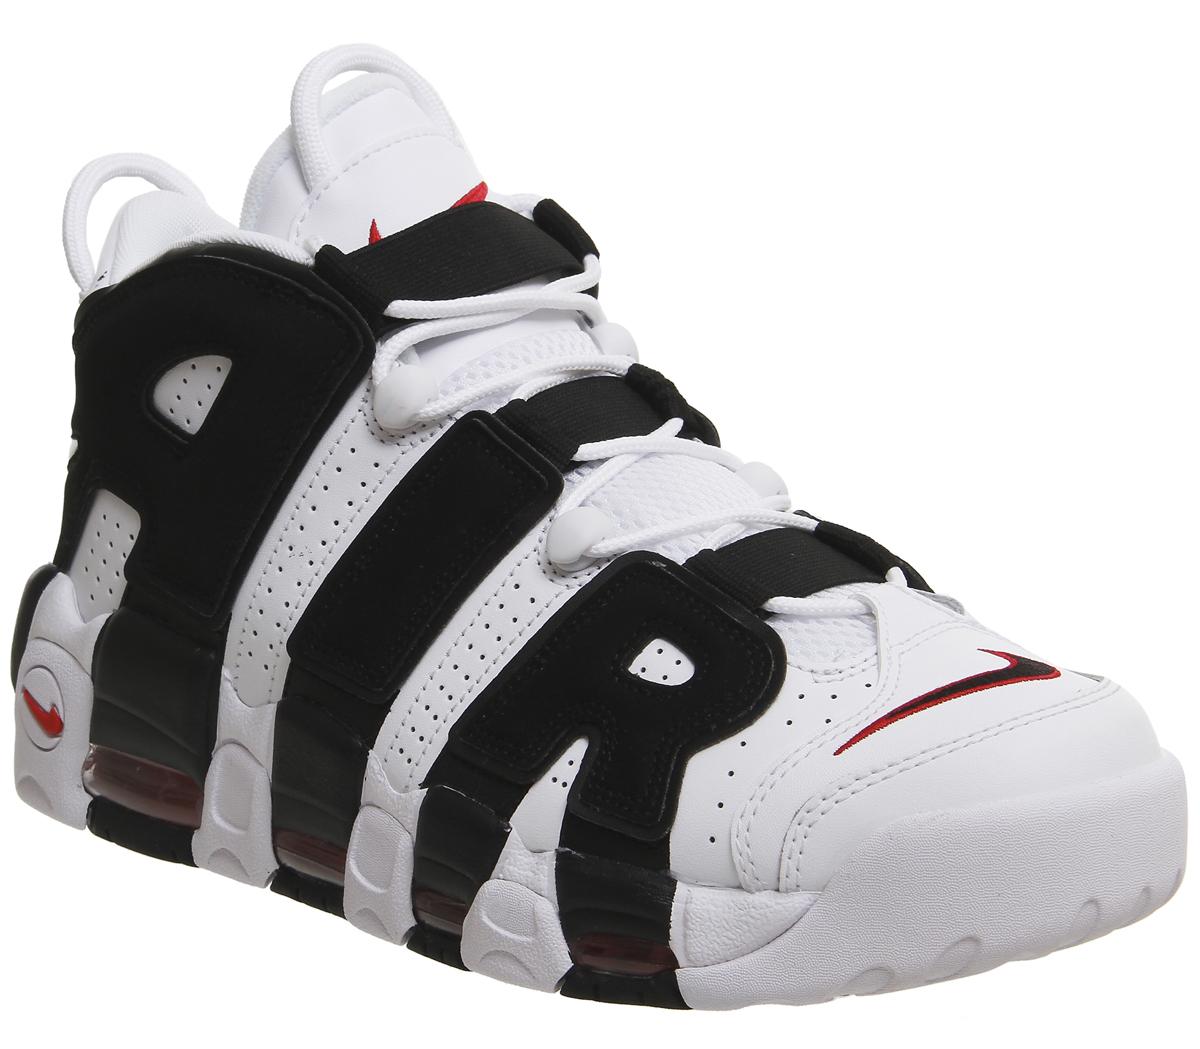 Nike Air More Up Tempo Trainers White Black Red - His trainers